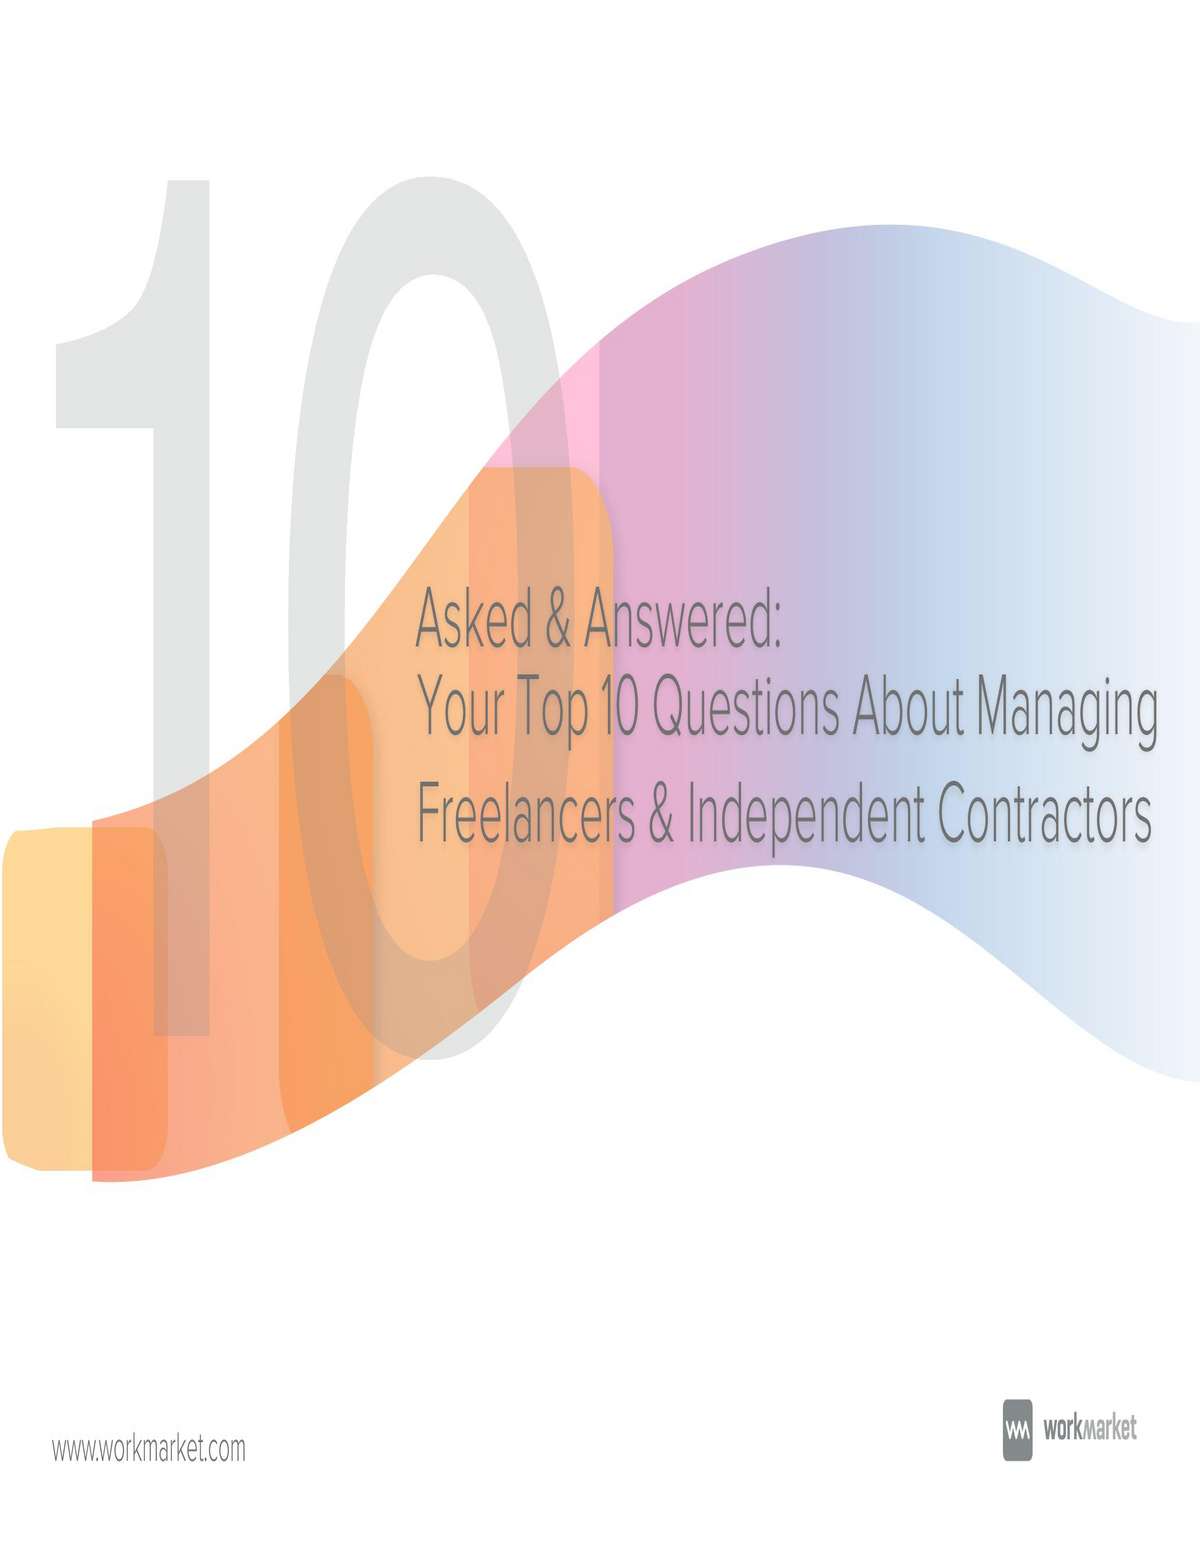 Asked & Answered: Your Top 10 Questions About Managing Freelancers & Independent Contractors